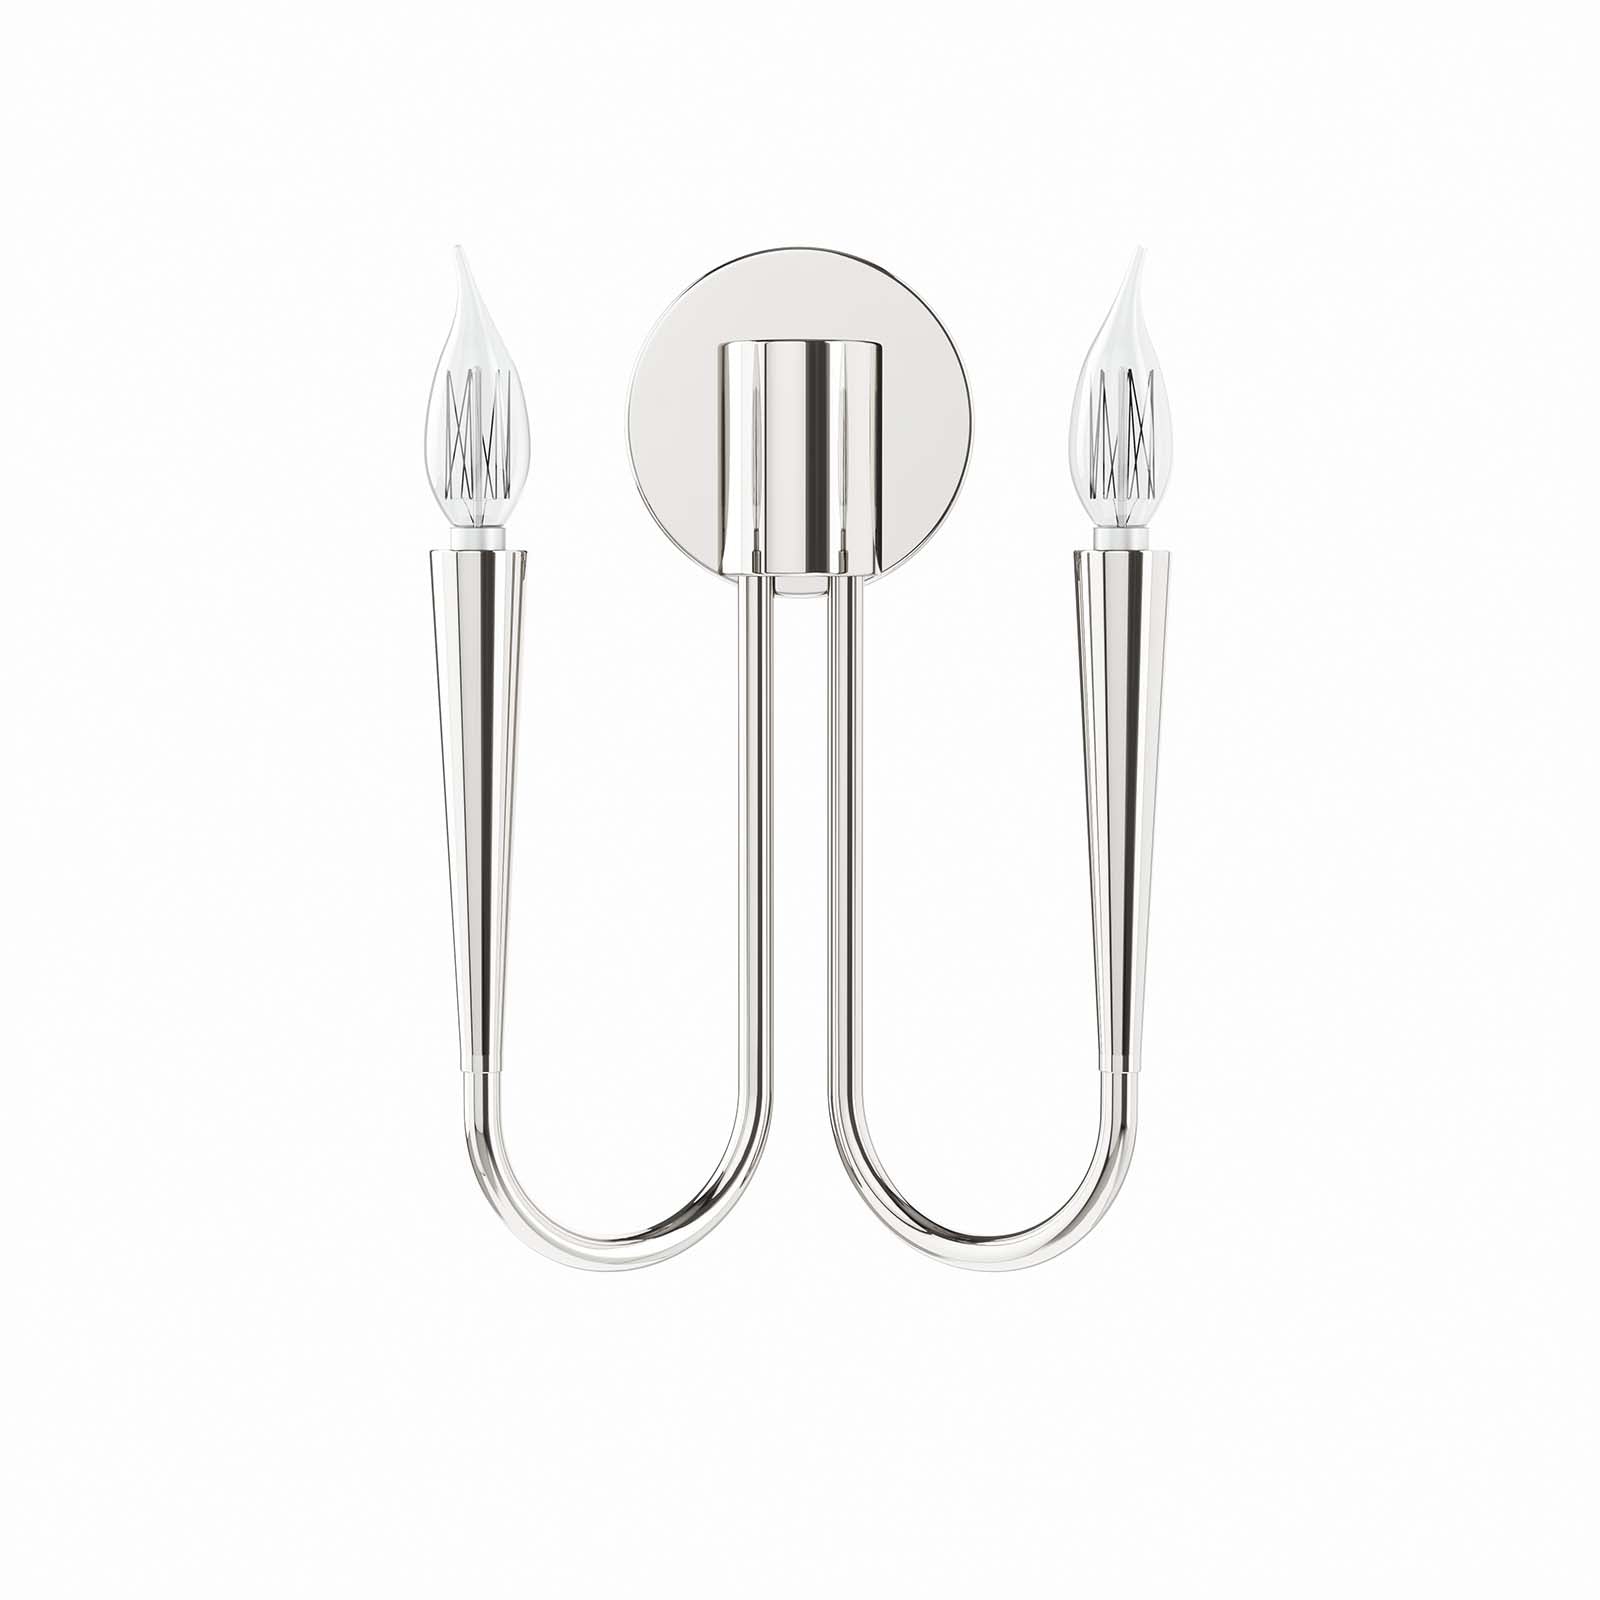 Modway Wall Sconces - Penrose 2-Light Wall Sconce Polished Nickel